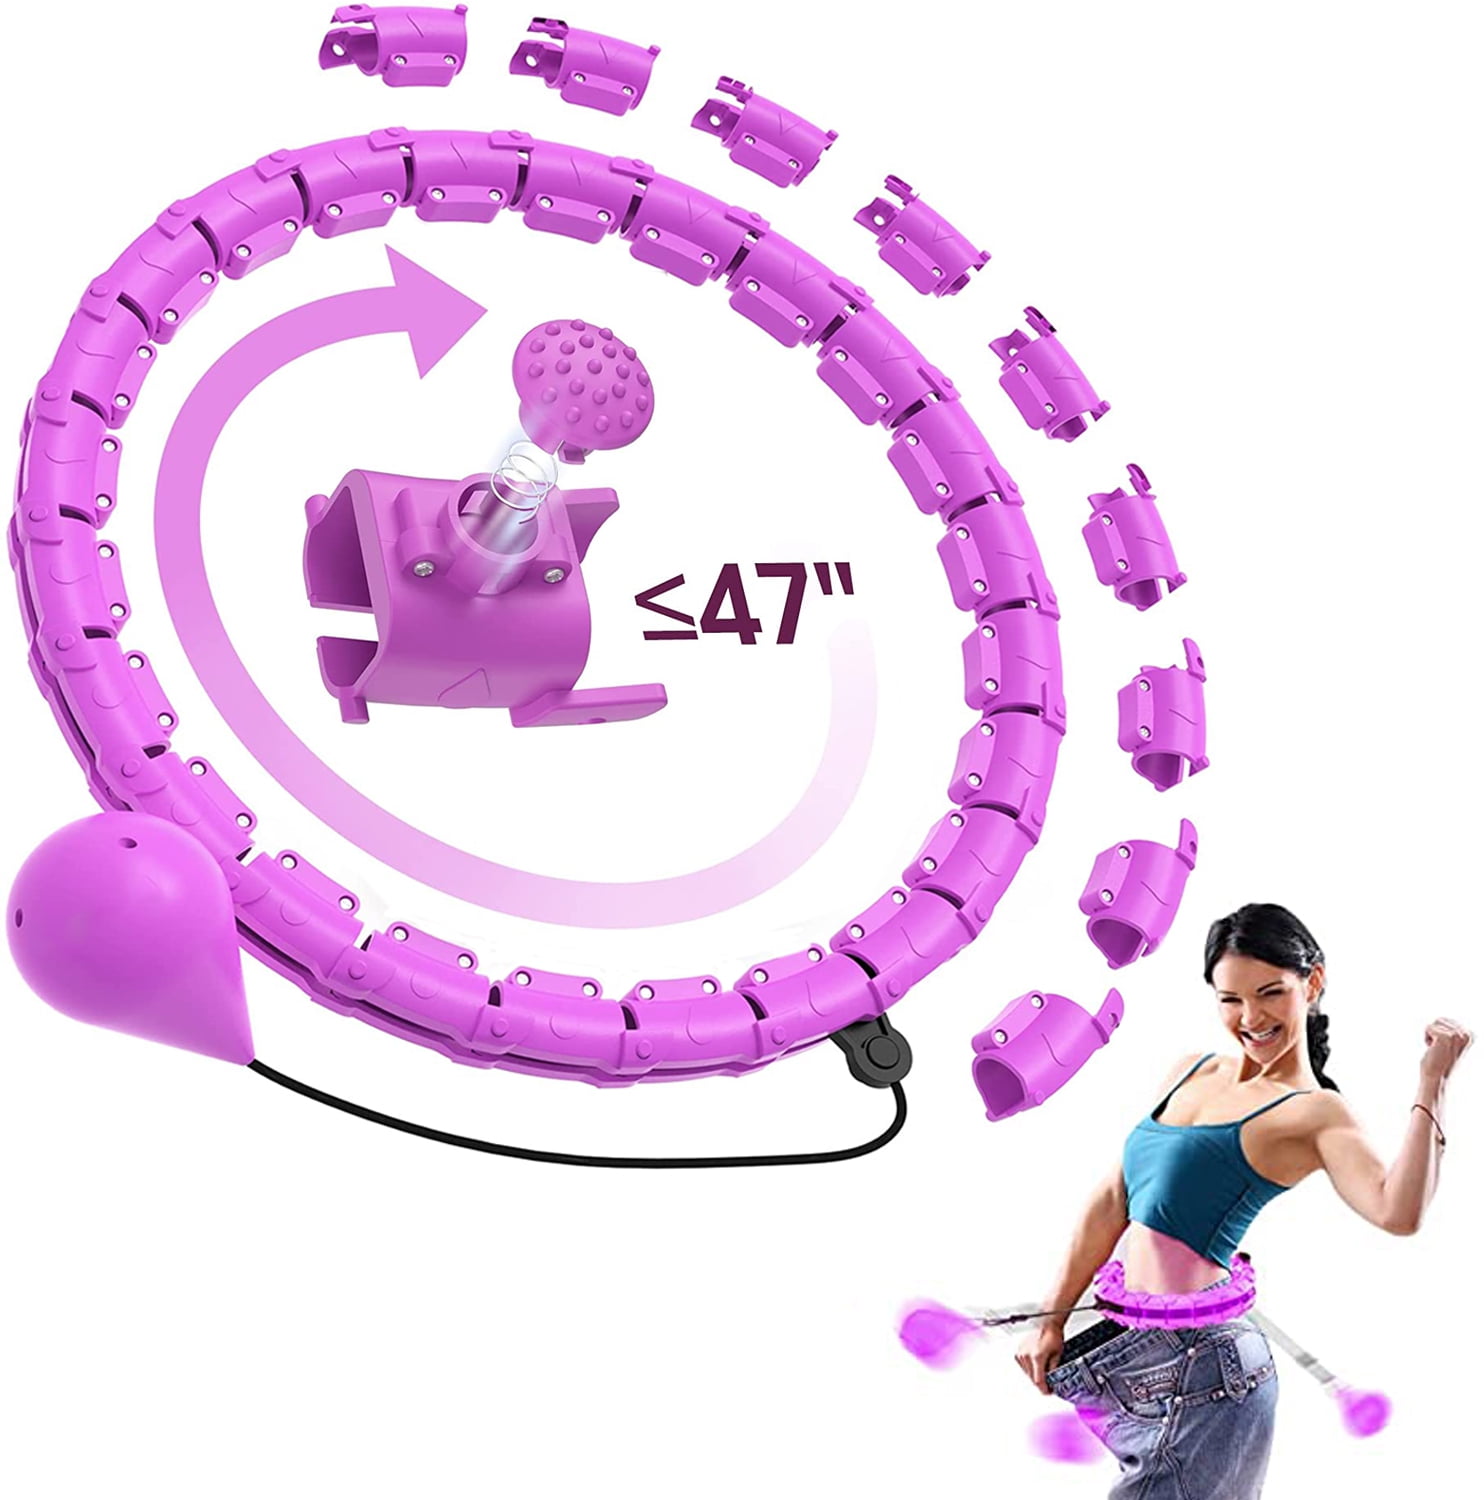 Abdomen Fitness Increase Beauty BOMTTY Weighted Intelligent Hoola Hoop for Adults Beginners Won‘t Fall Fit Ness Weight Loss and Massage 24 Knots Detachable 